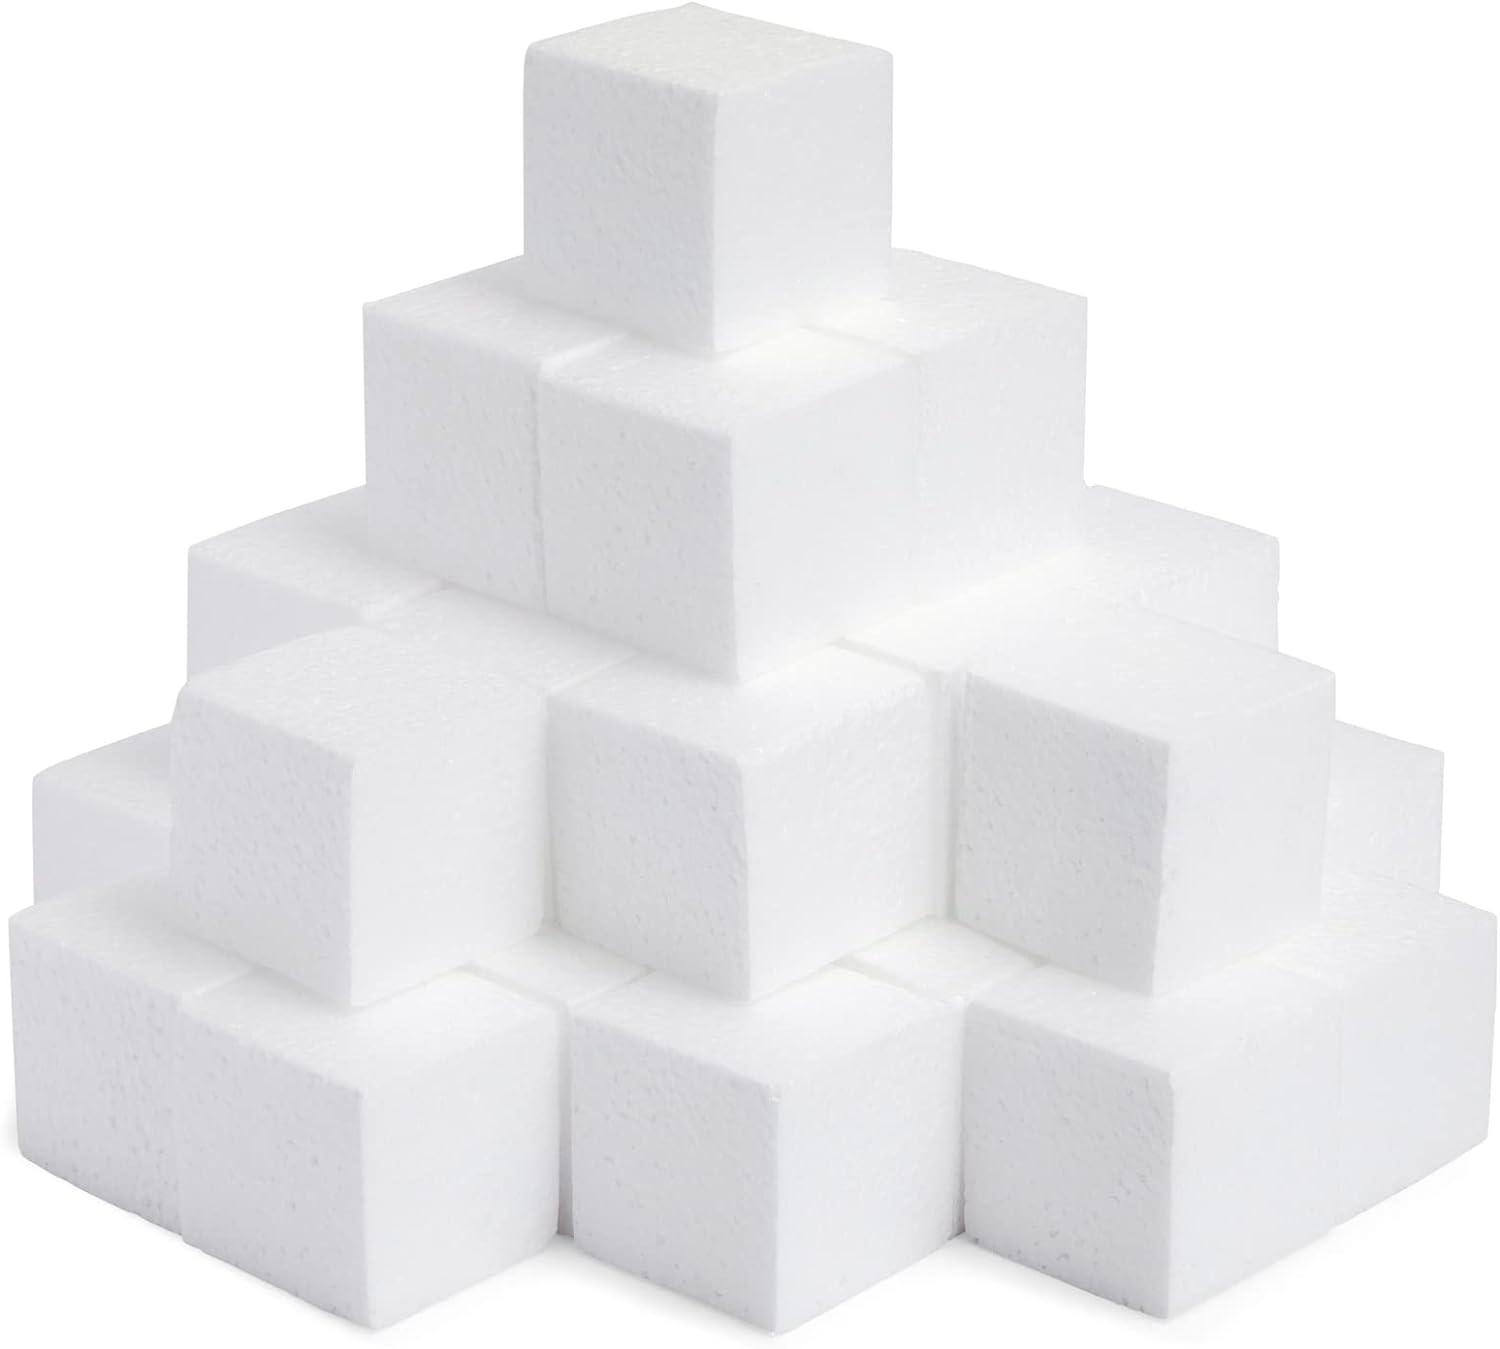 36 Pack Blank Foam Cubes and Square Blocks for Crafts, School